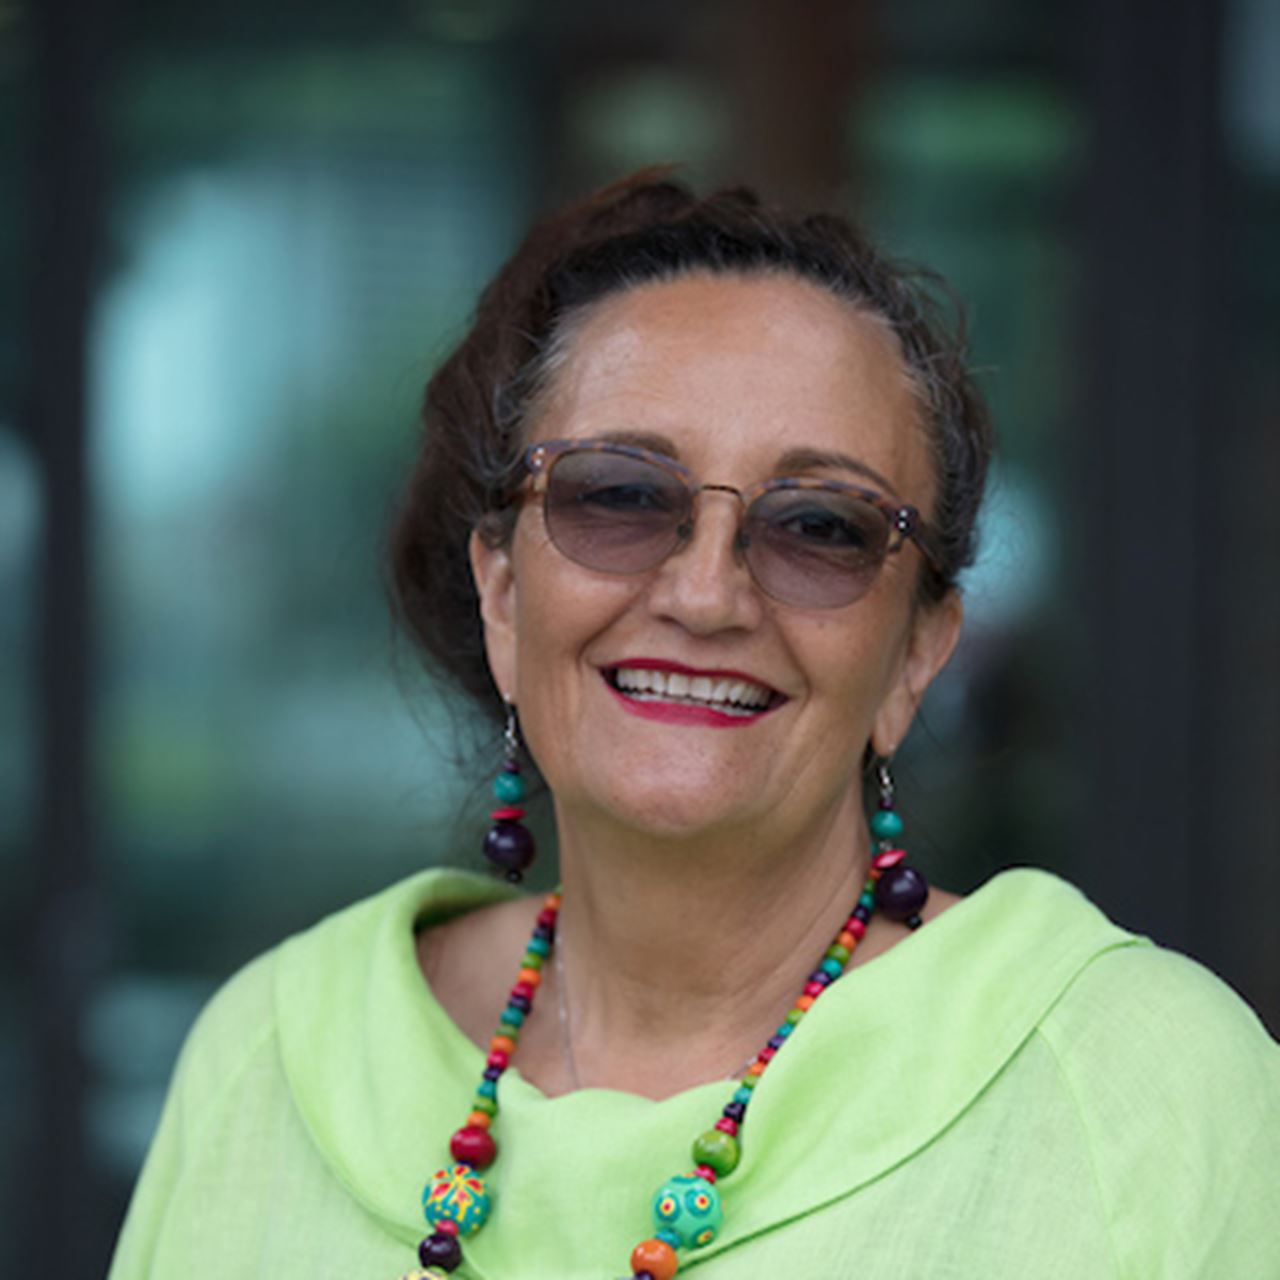 Hine Waitere, Director of Te Āwheonui: The Centre for Professional Learning and Development